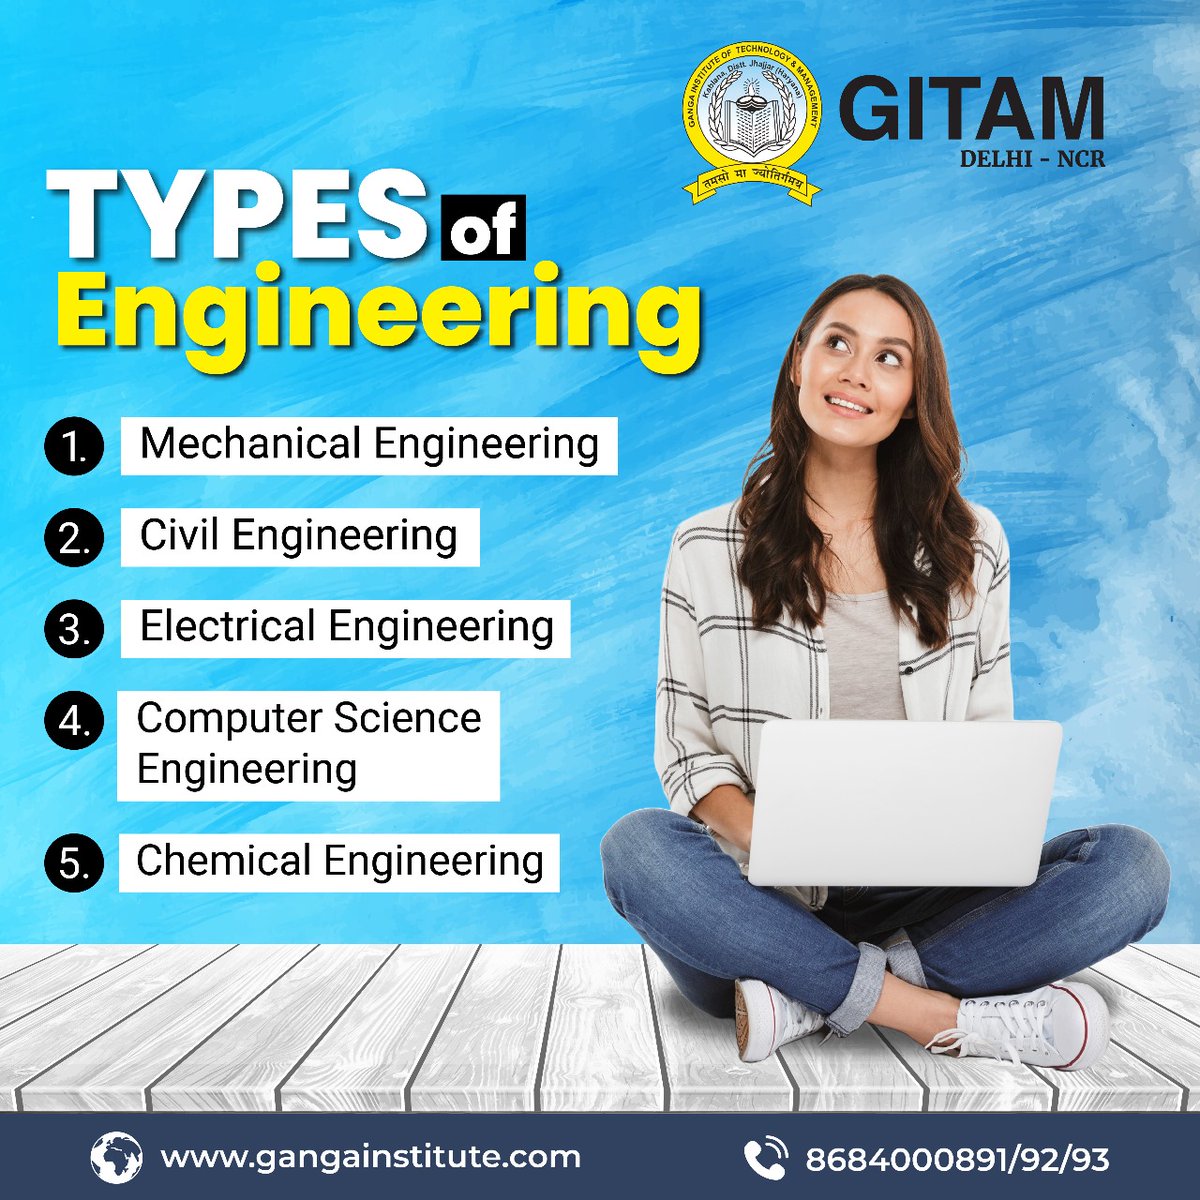 Explore the variety of engineering fields. Comment below which one you're pursuing.
.
.
.
#EngineeringExcellence #Engineering #civilengineeringstudent #electricalengineering #mechanicalengineering #computerscienceeducation #chemicalengineers #students #college #engineeringcollege